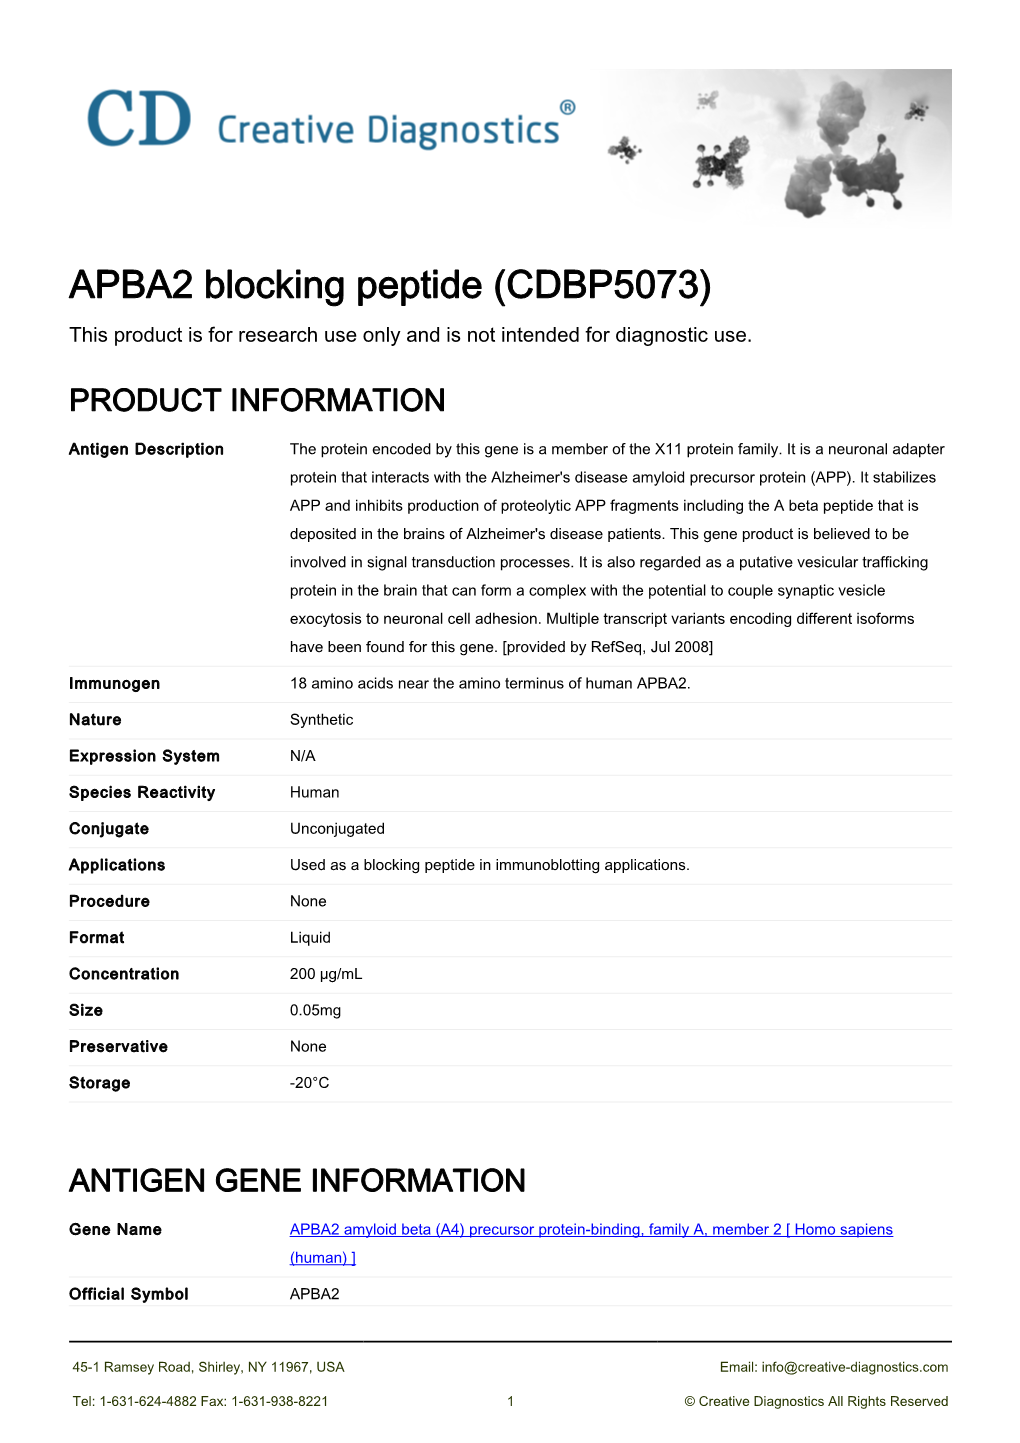 APBA2 Blocking Peptide (CDBP5073) This Product Is for Research Use Only and Is Not Intended for Diagnostic Use